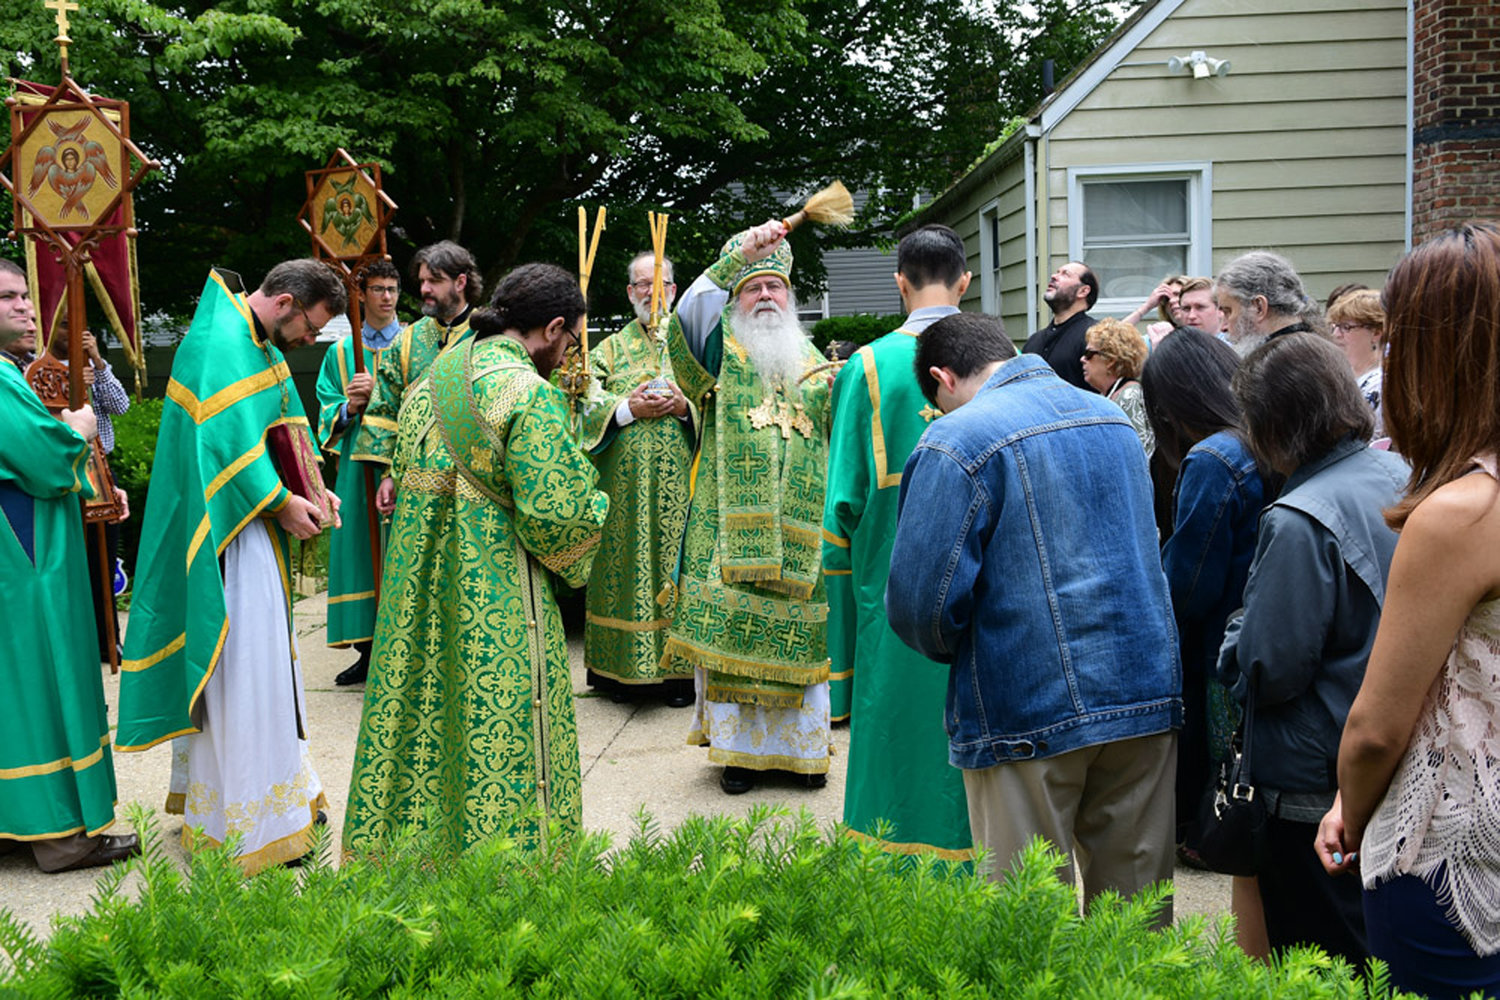 The metropolitan blesses with water.